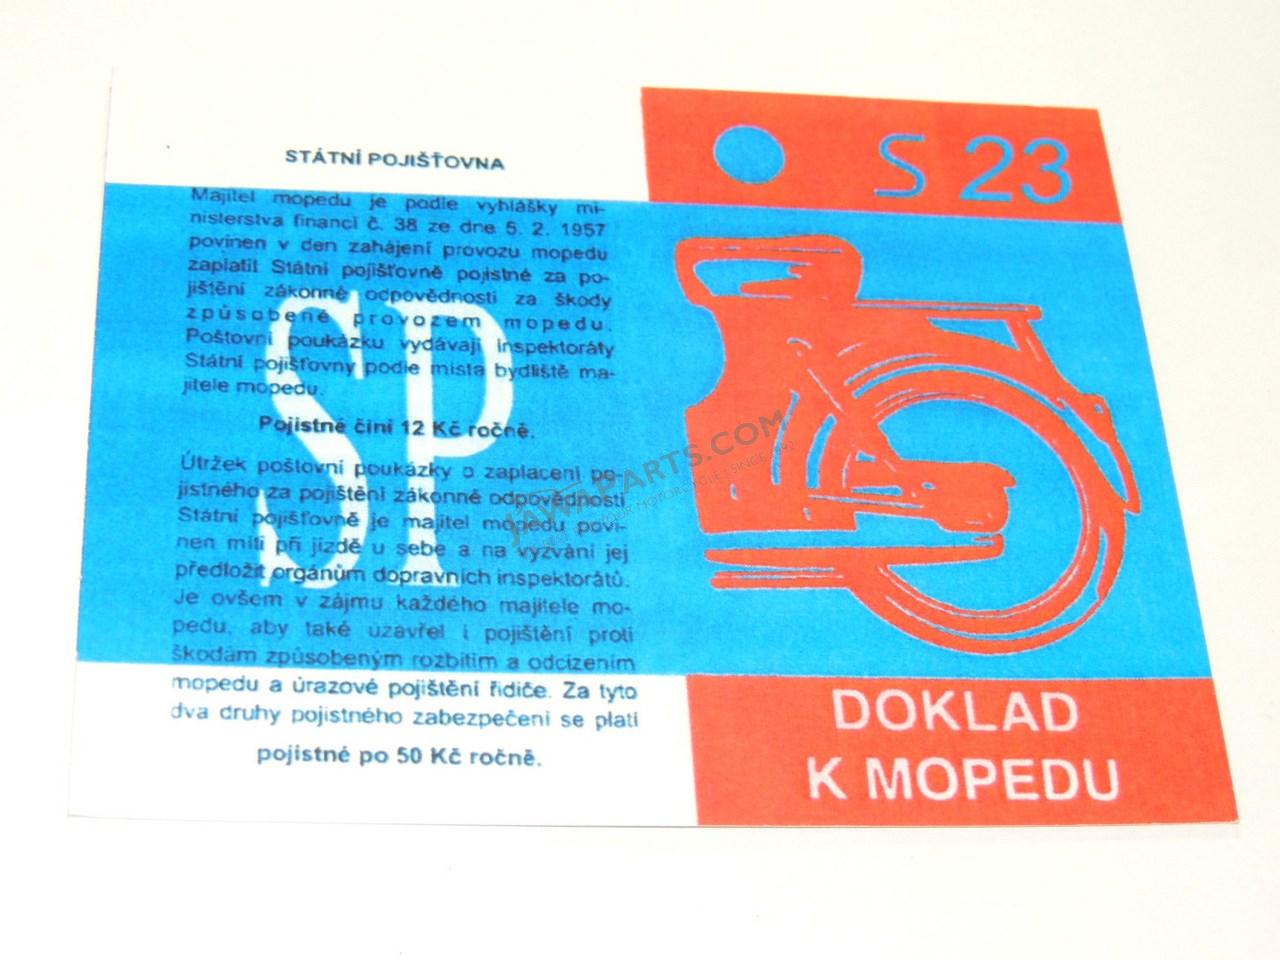 Certificate (card) for Stadion S23